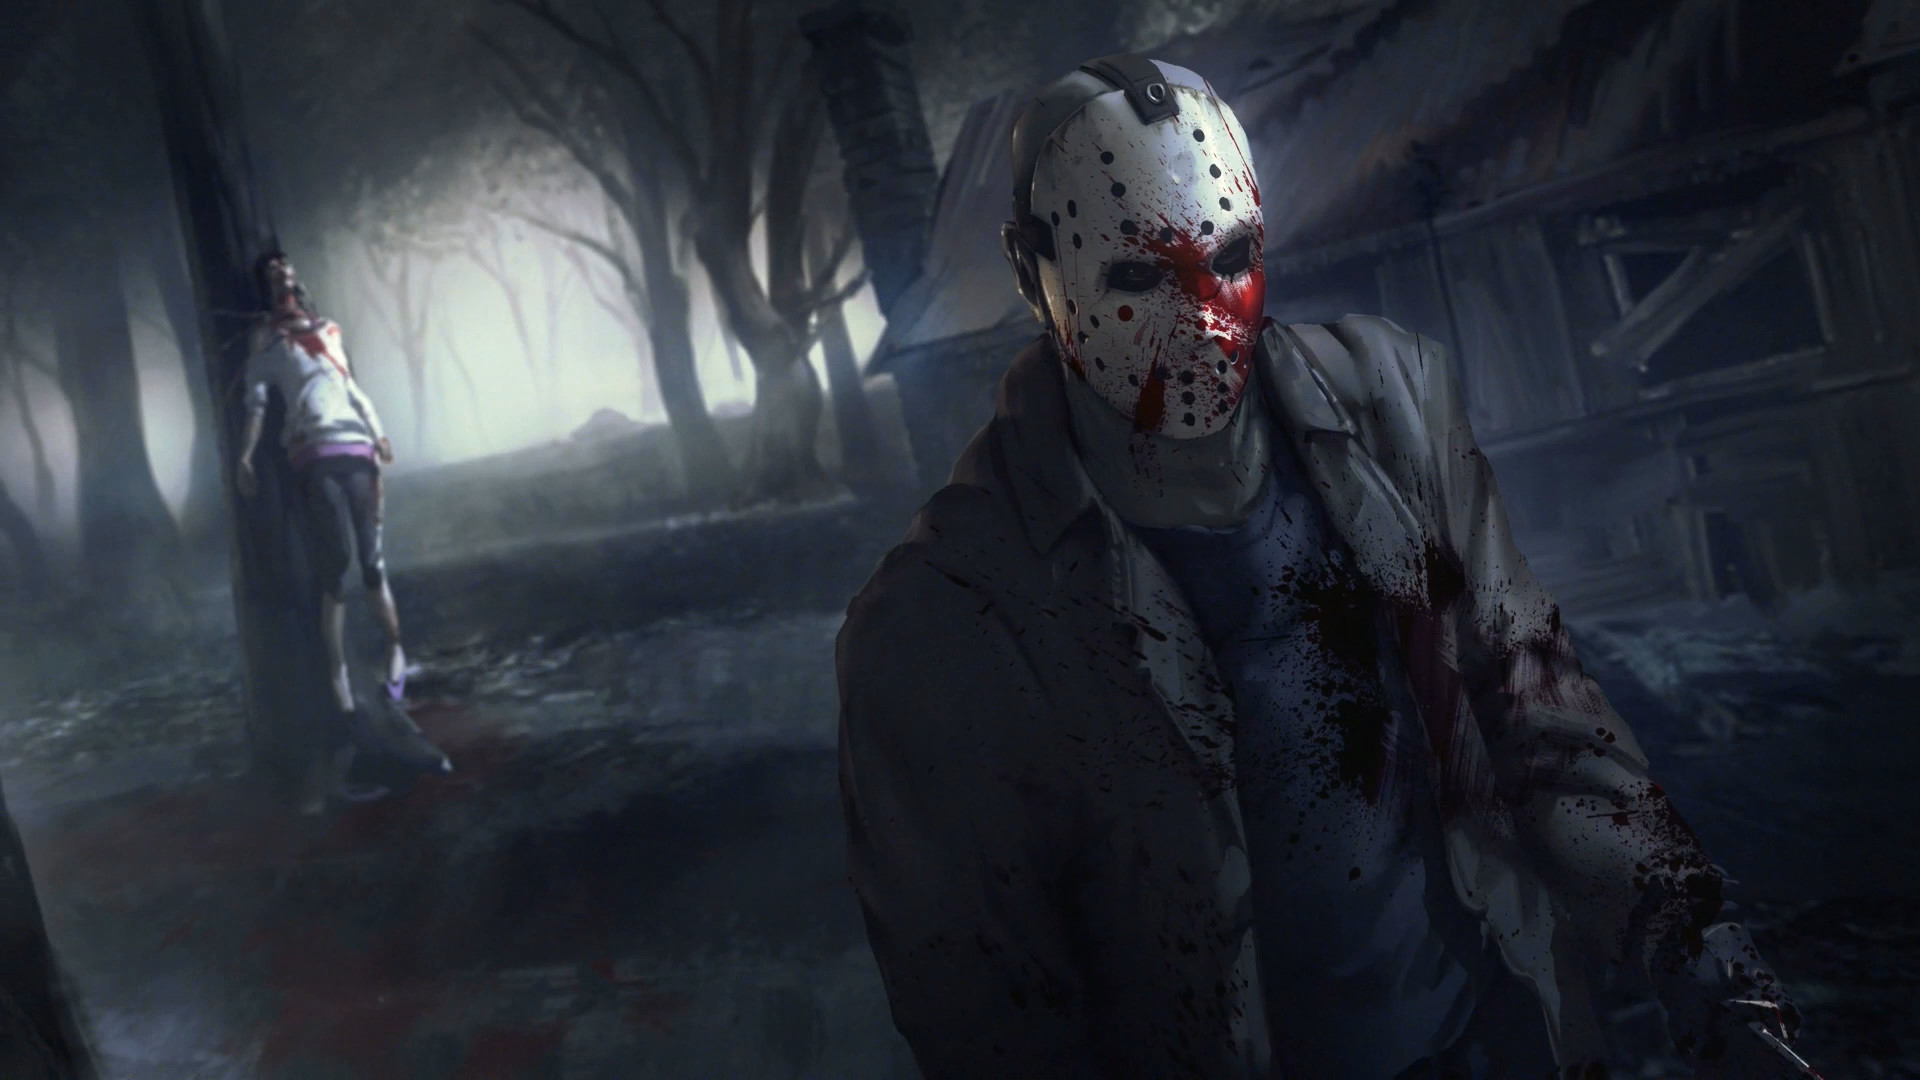 1920x1080 Video Game - Friday the 13th: The Game Wallpaper